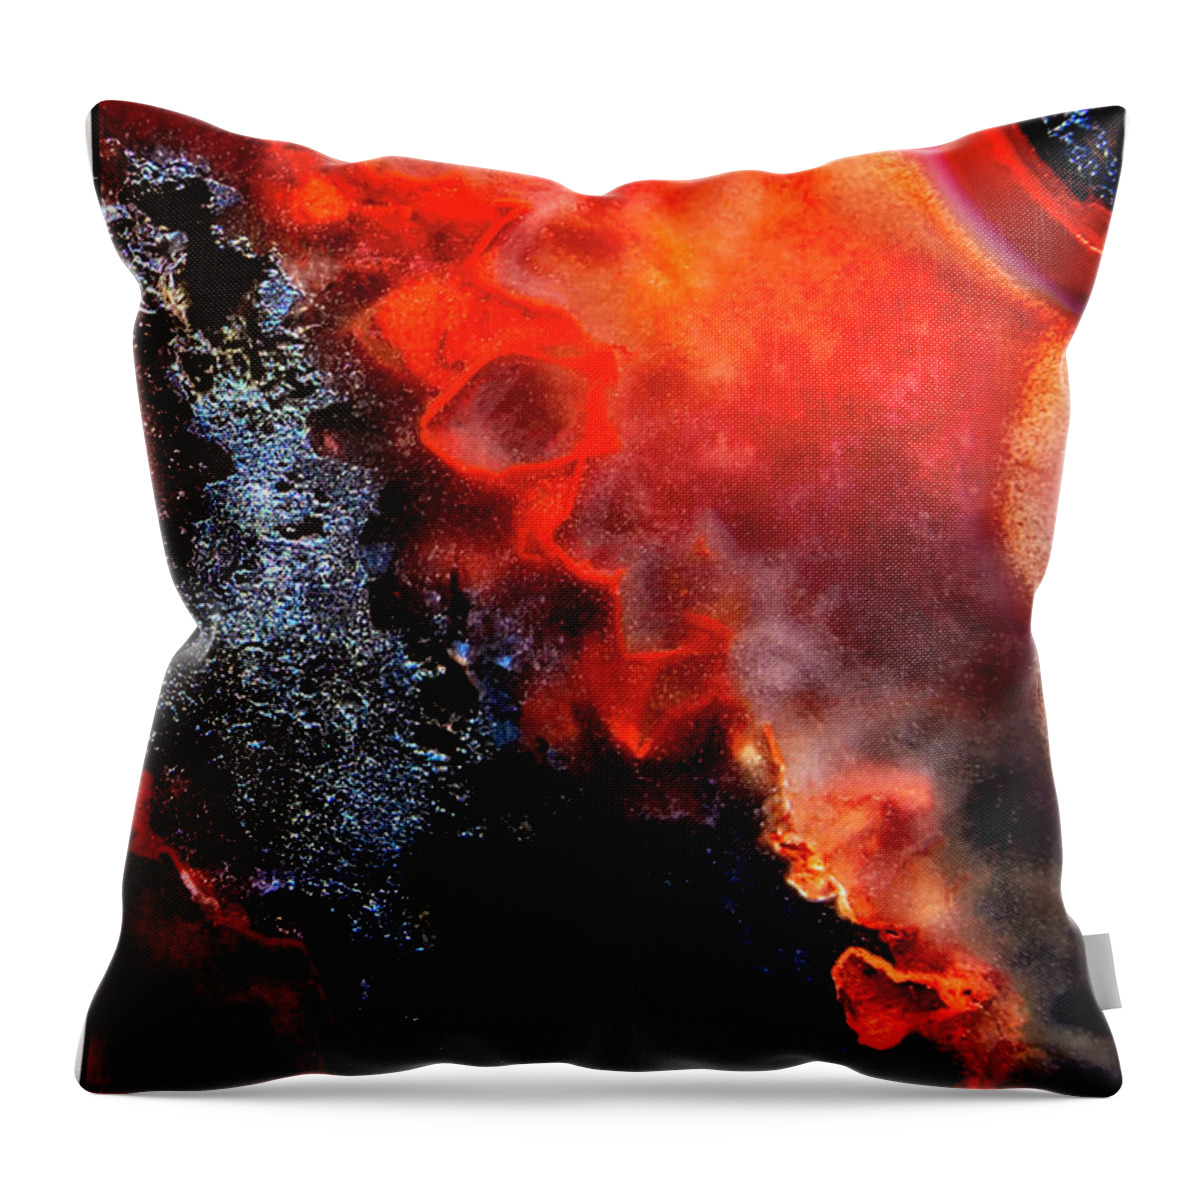 Fine Art Photography Throw Pillow featuring the photograph Pit by John Strong